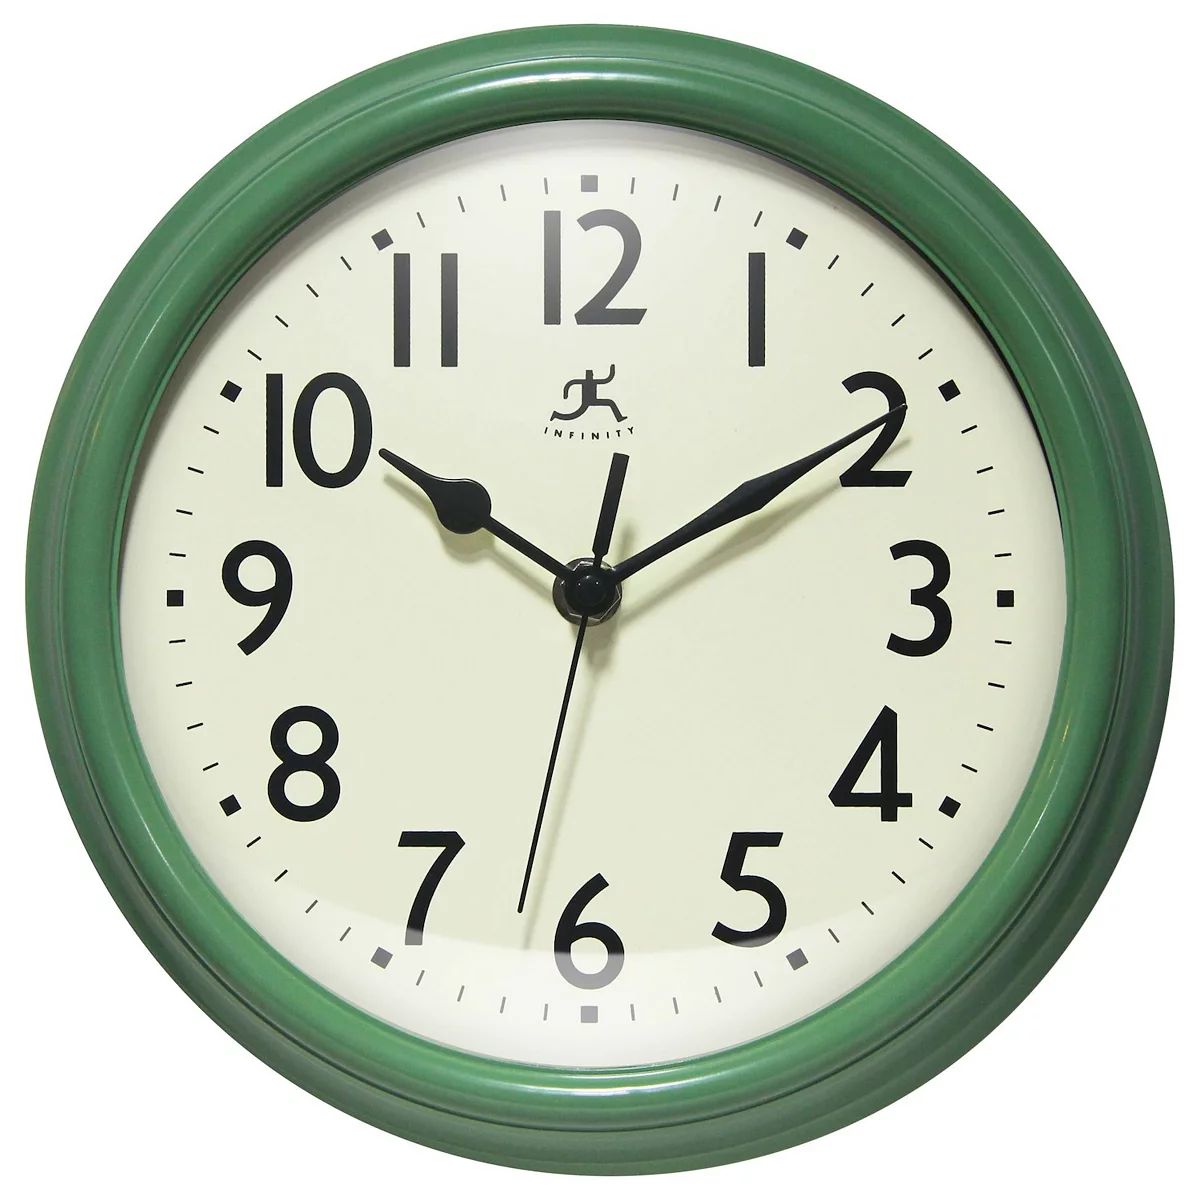 Infinity Instruments 9.5-in. Round Wall Clock with Silent Movement | Kohl's